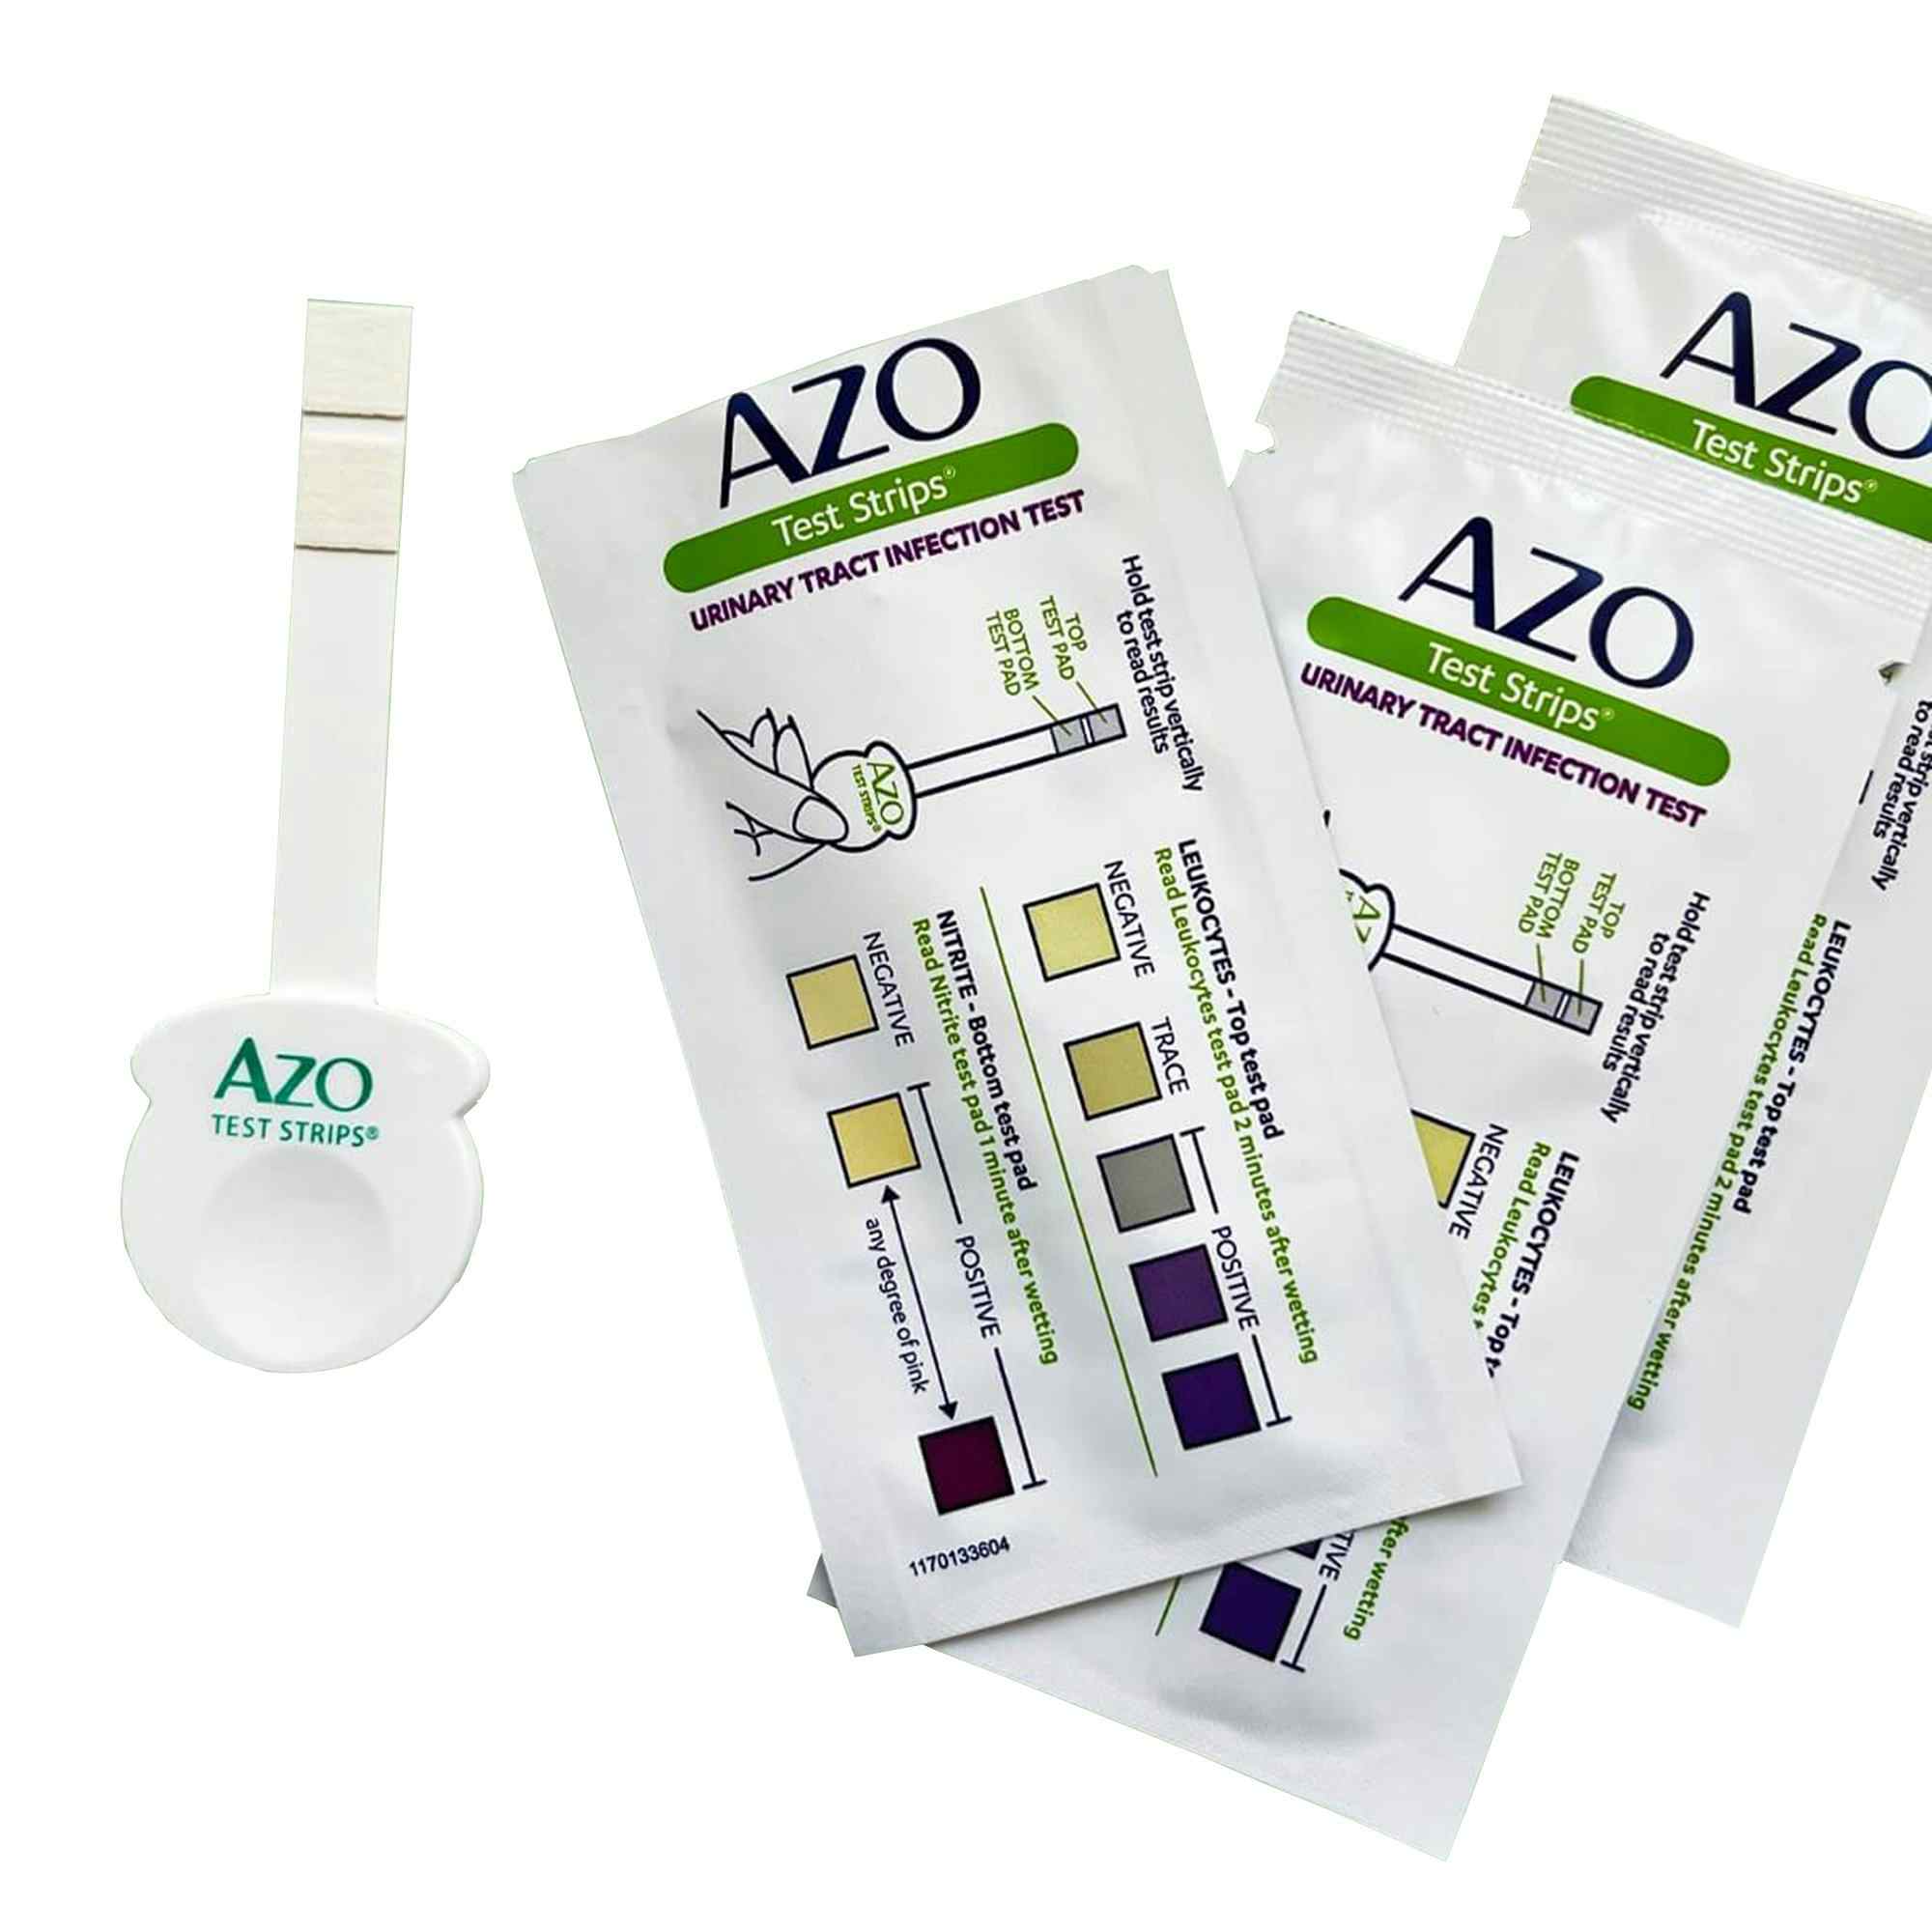 Azo Urinary Tract Infection Test Strips Carewell 8325